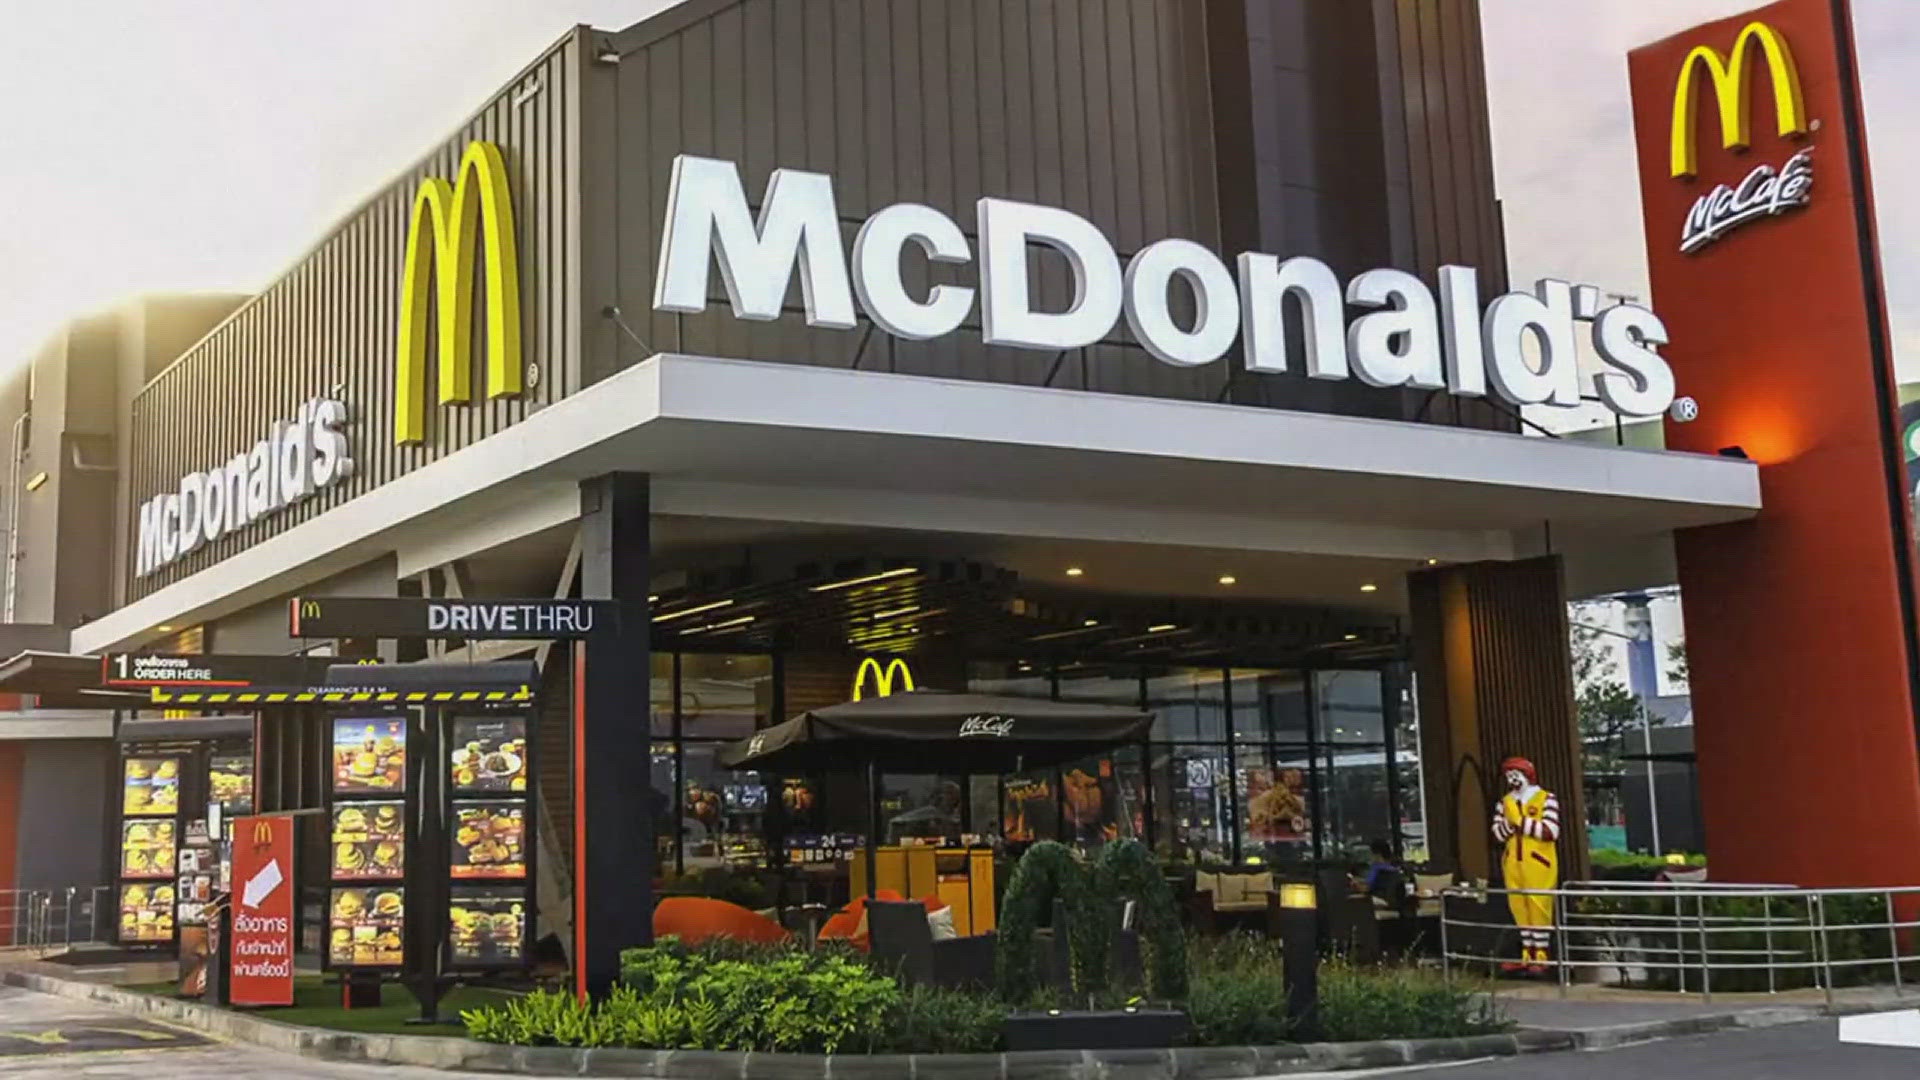 McDonalds locations are adding a new $5 menu to compete with Wendy's and Burger King. Other restaurants are considering bankruptcy amid high labor and food costs.